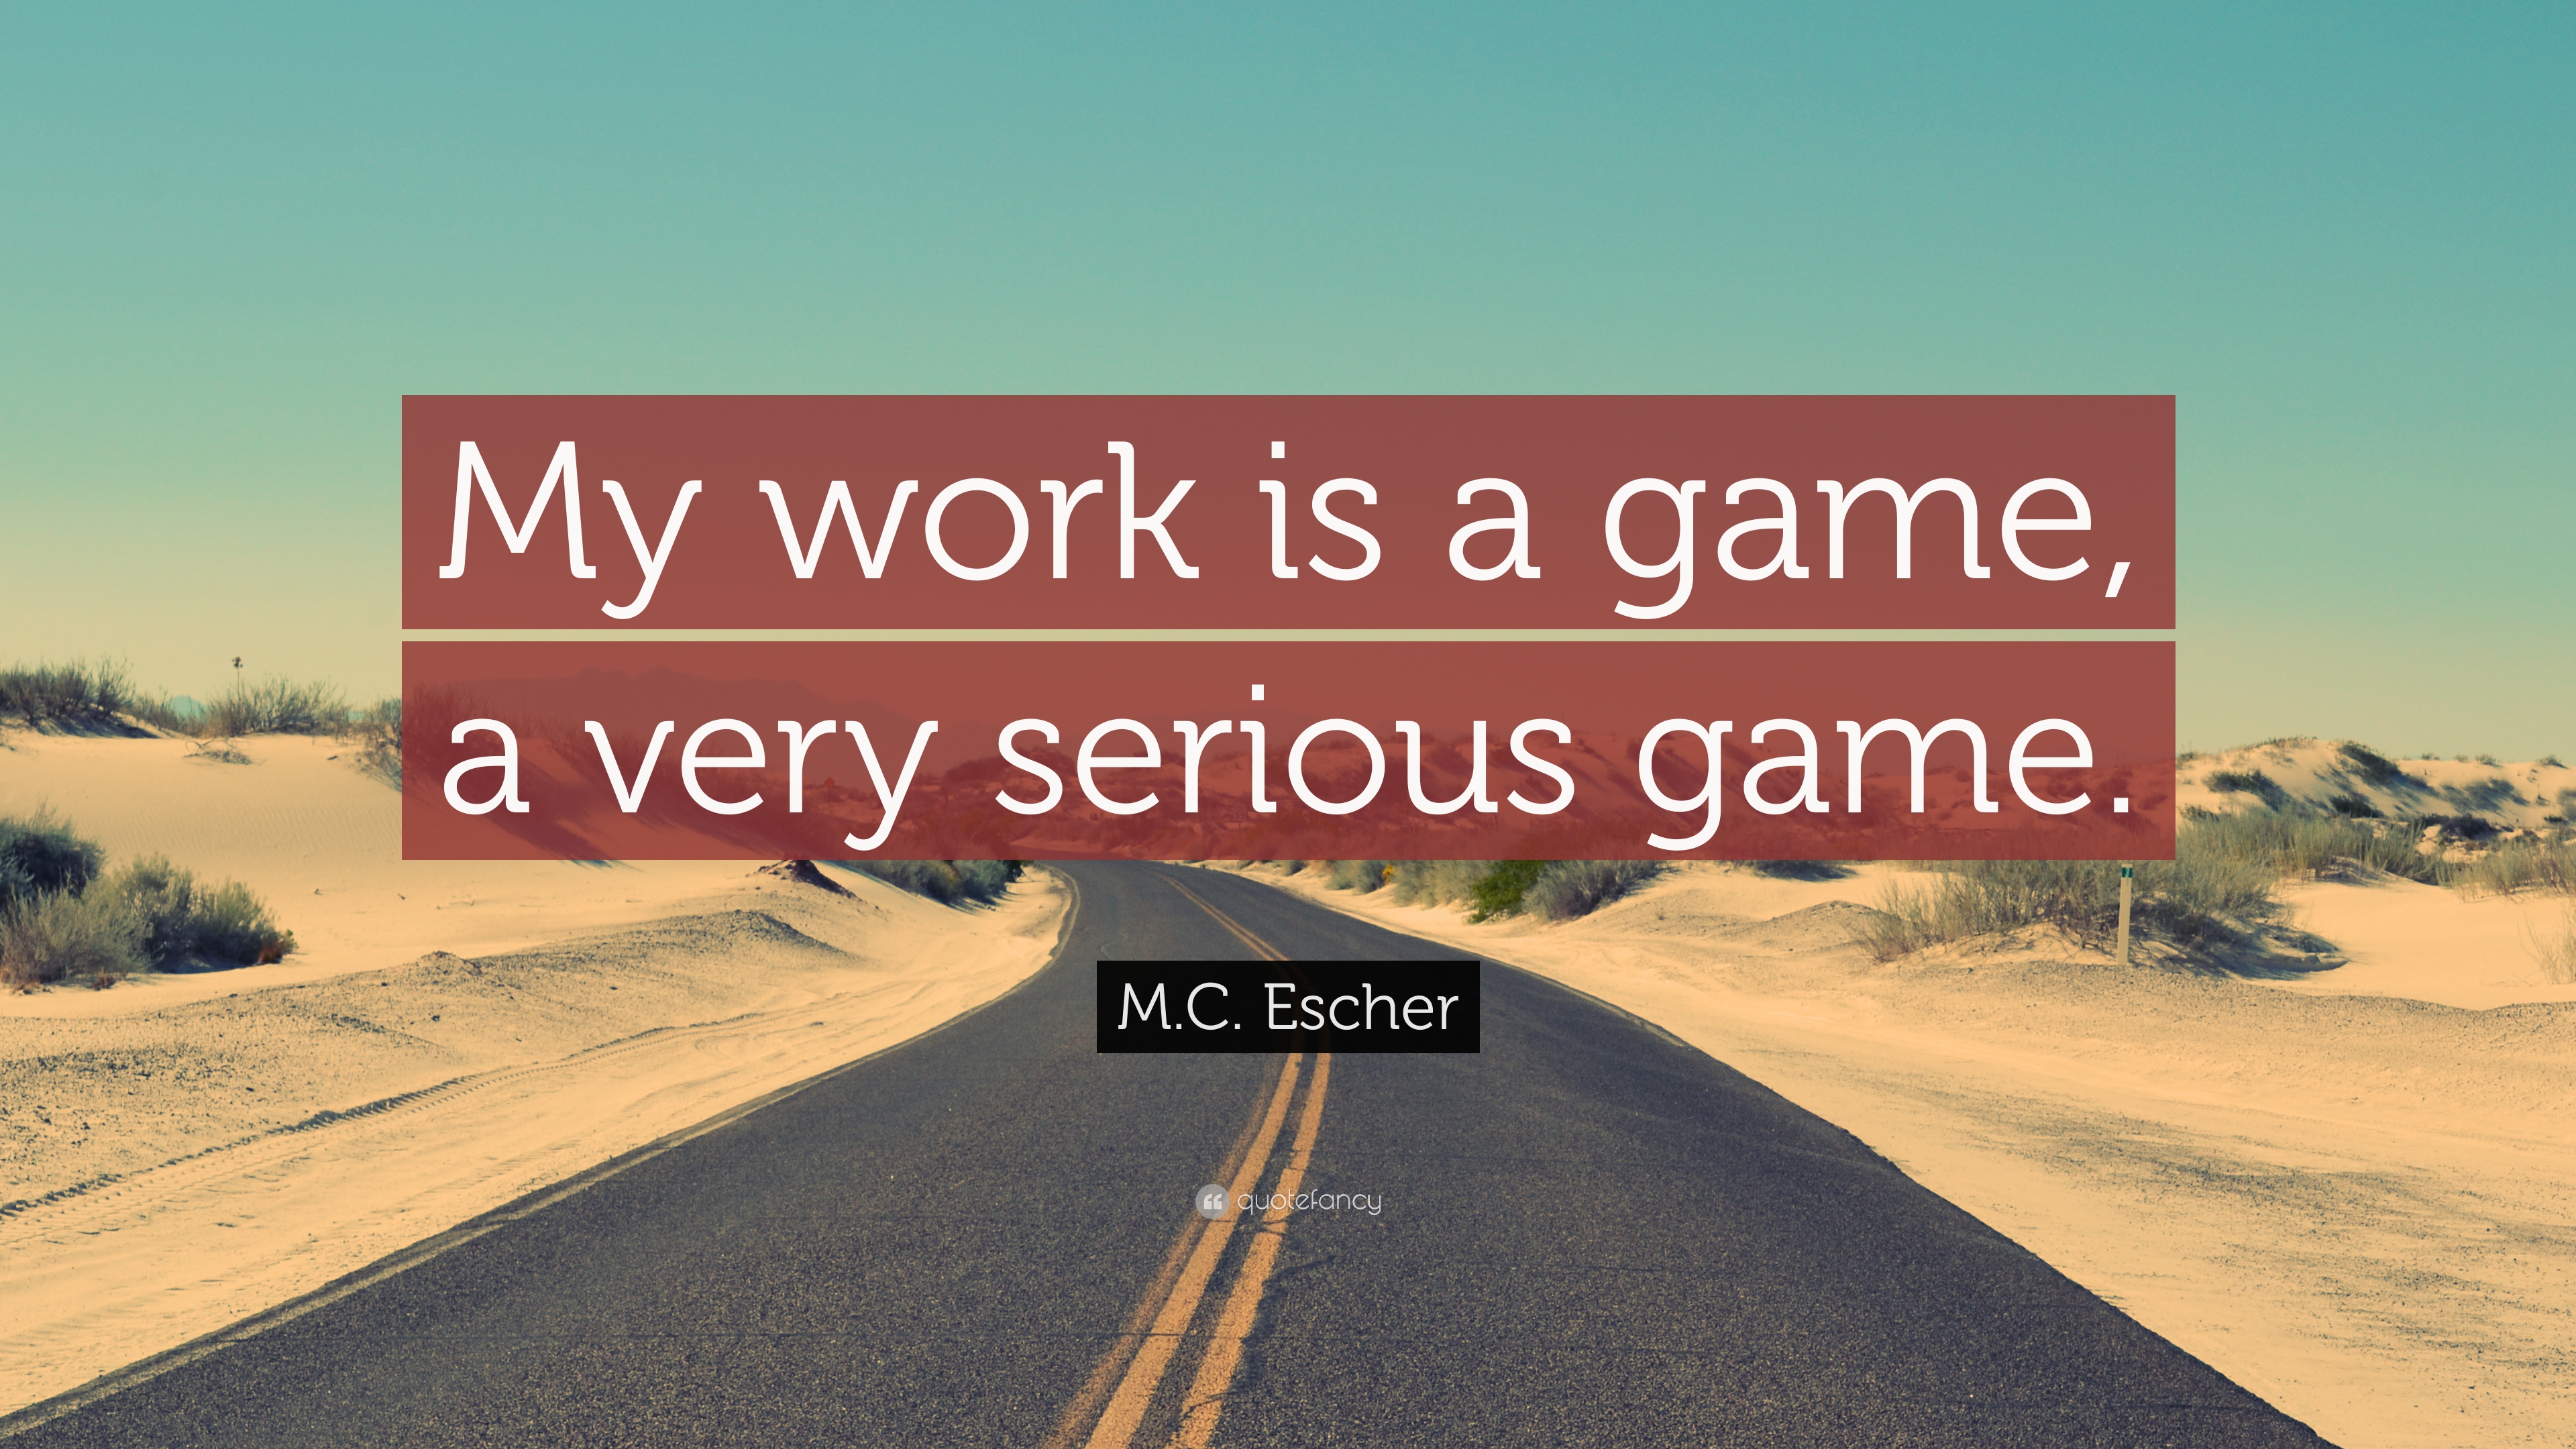 Escher Quote - Going The Extra Mile Quotes - HD Wallpaper 